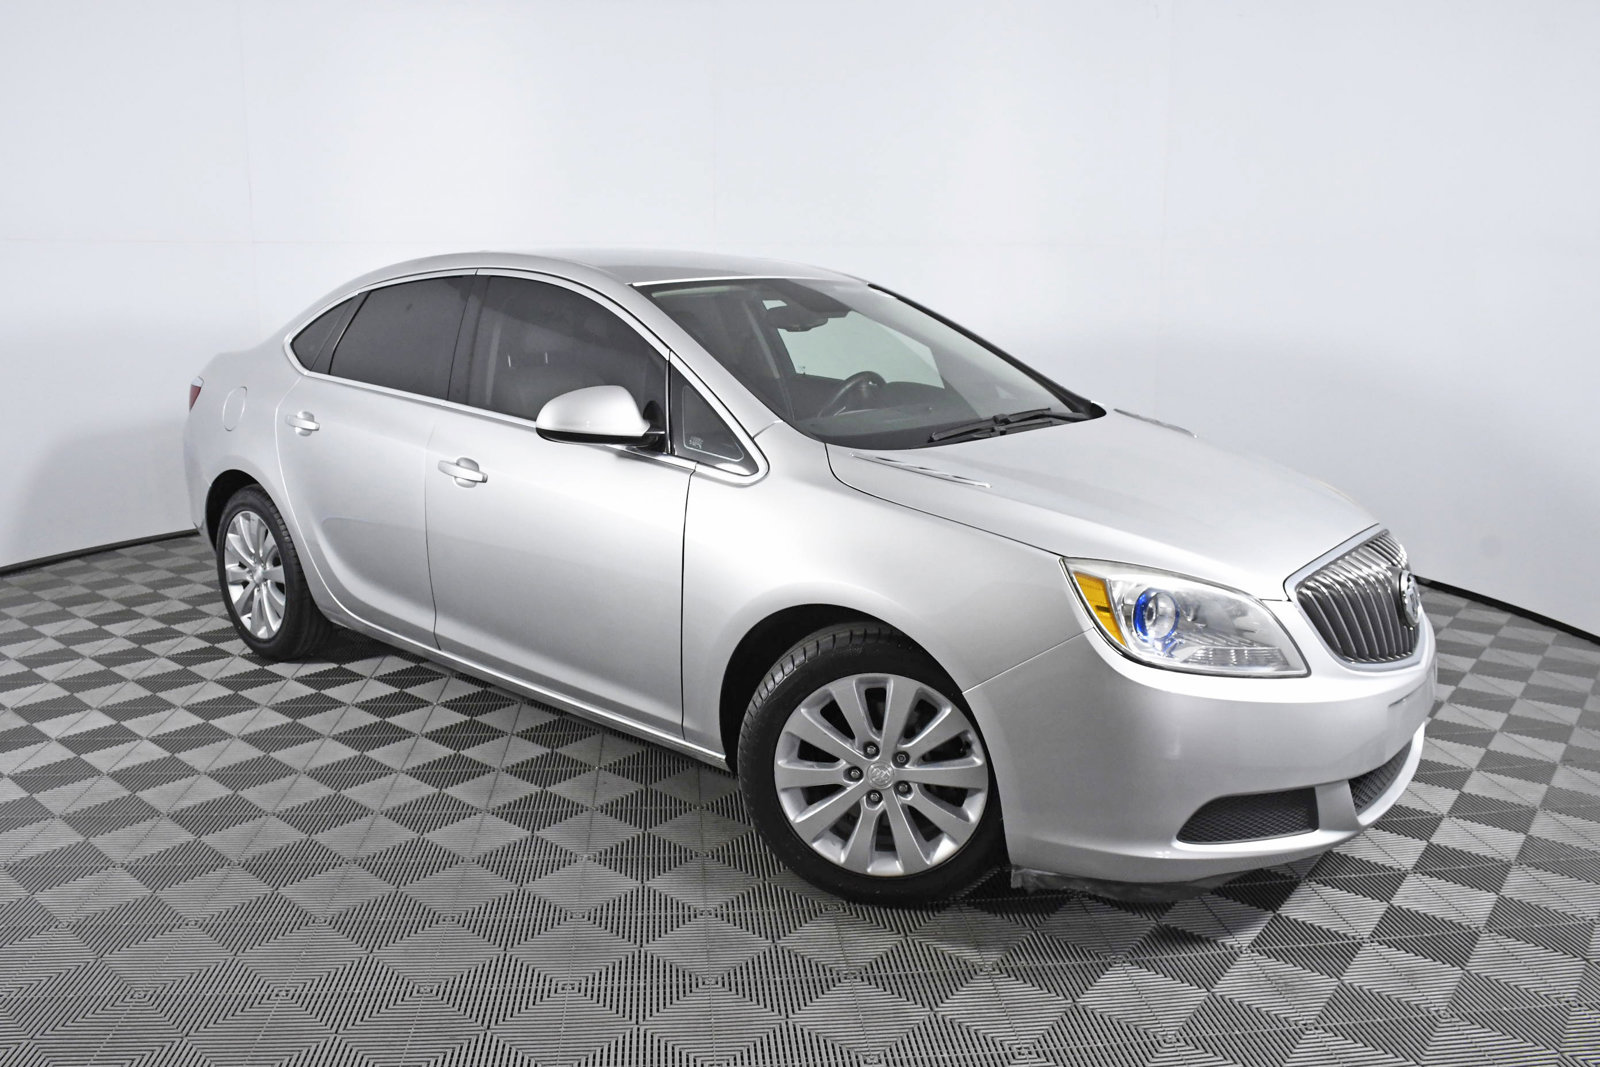 Pre-Owned 2016 Buick Verano Base 4dr Car in Palmetto Bay #C008546A | HGreg  Nissan Kendall